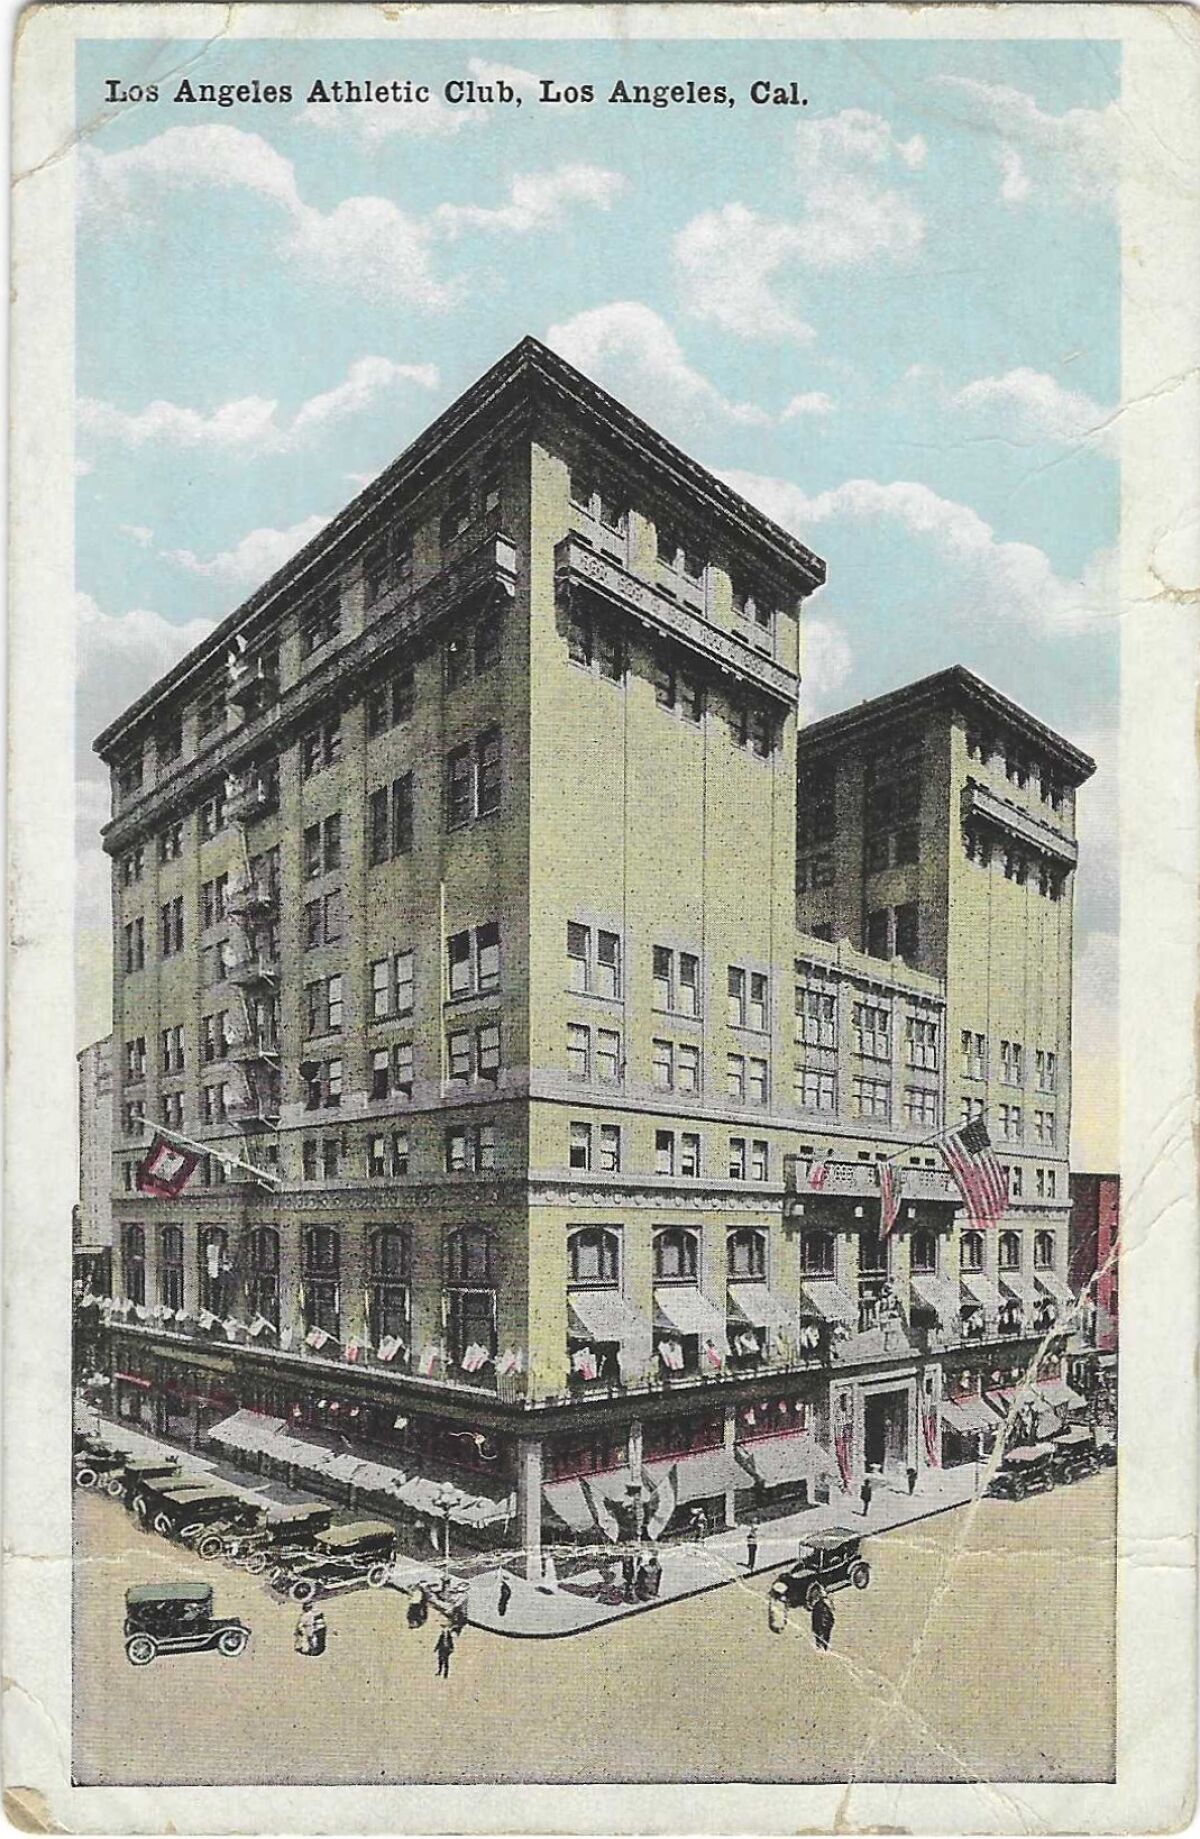 Exterior view of Los Angeles Athletic Club